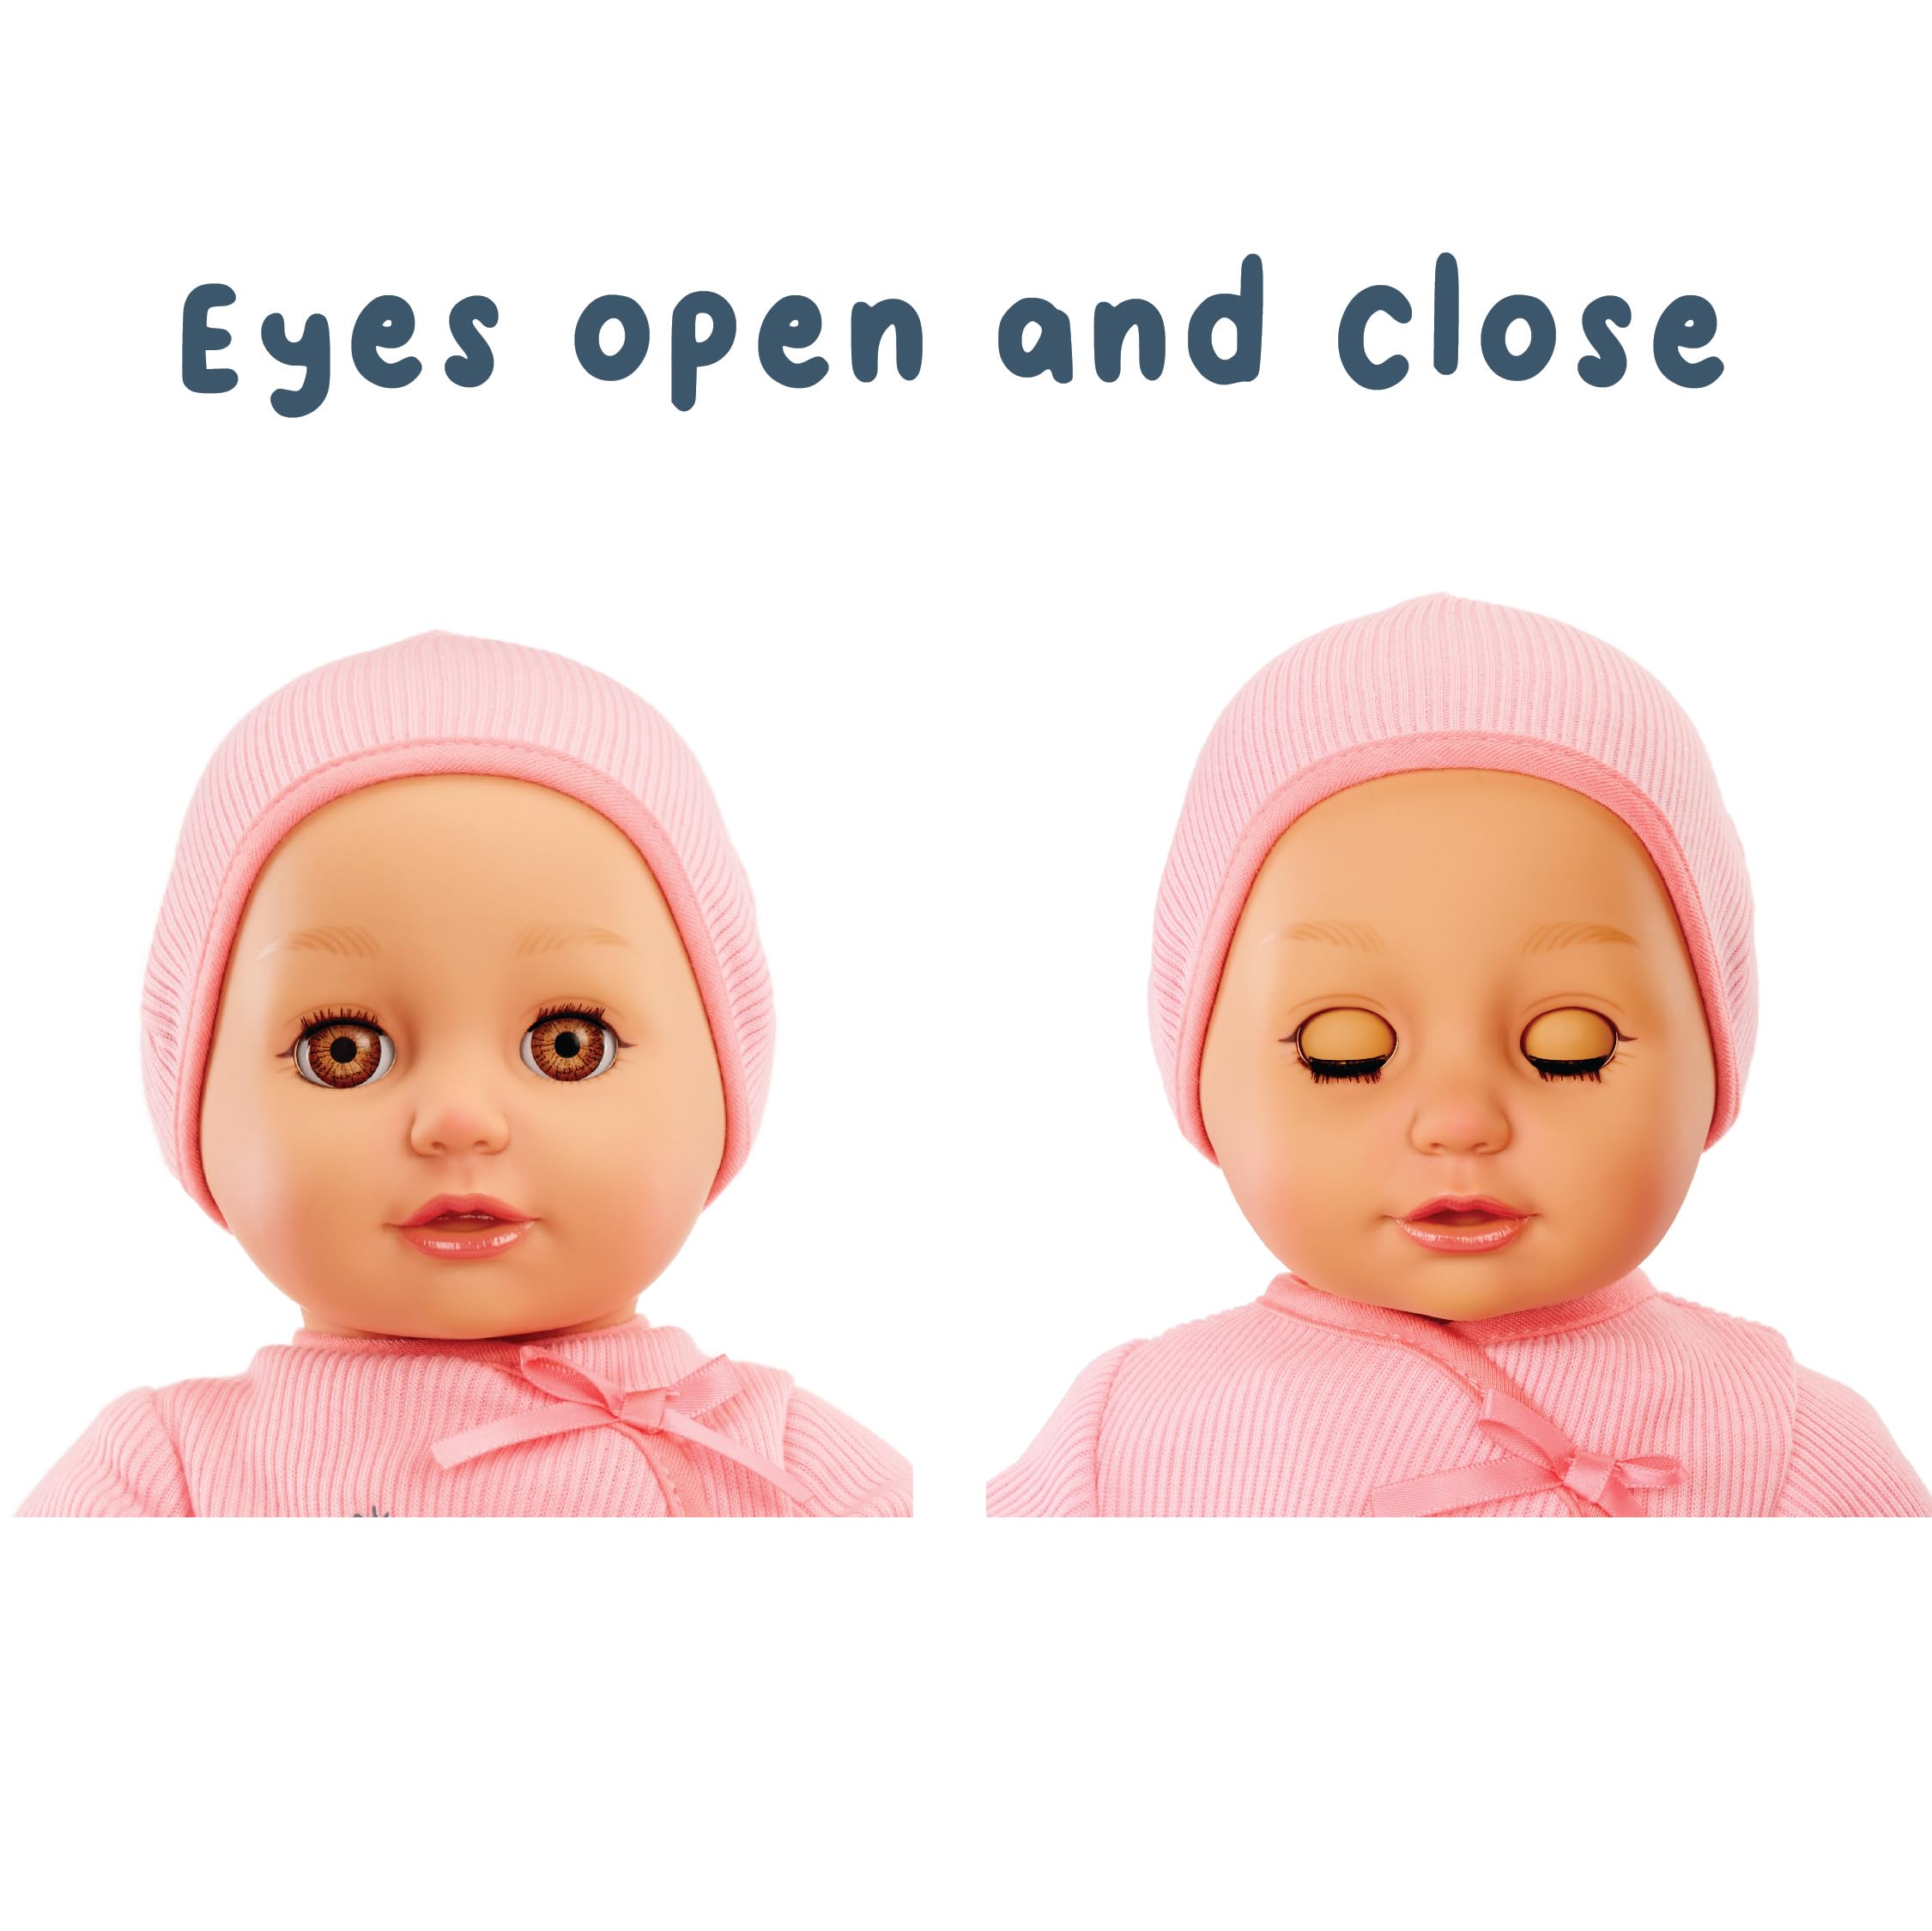 Baby Born My First Baby Doll Ava - Light Brown Eyes: Realistic Soft-Bodied Baby Doll for Kids Ages 1 & Up, Eyes Open & Close, Baby Doll with Bottle